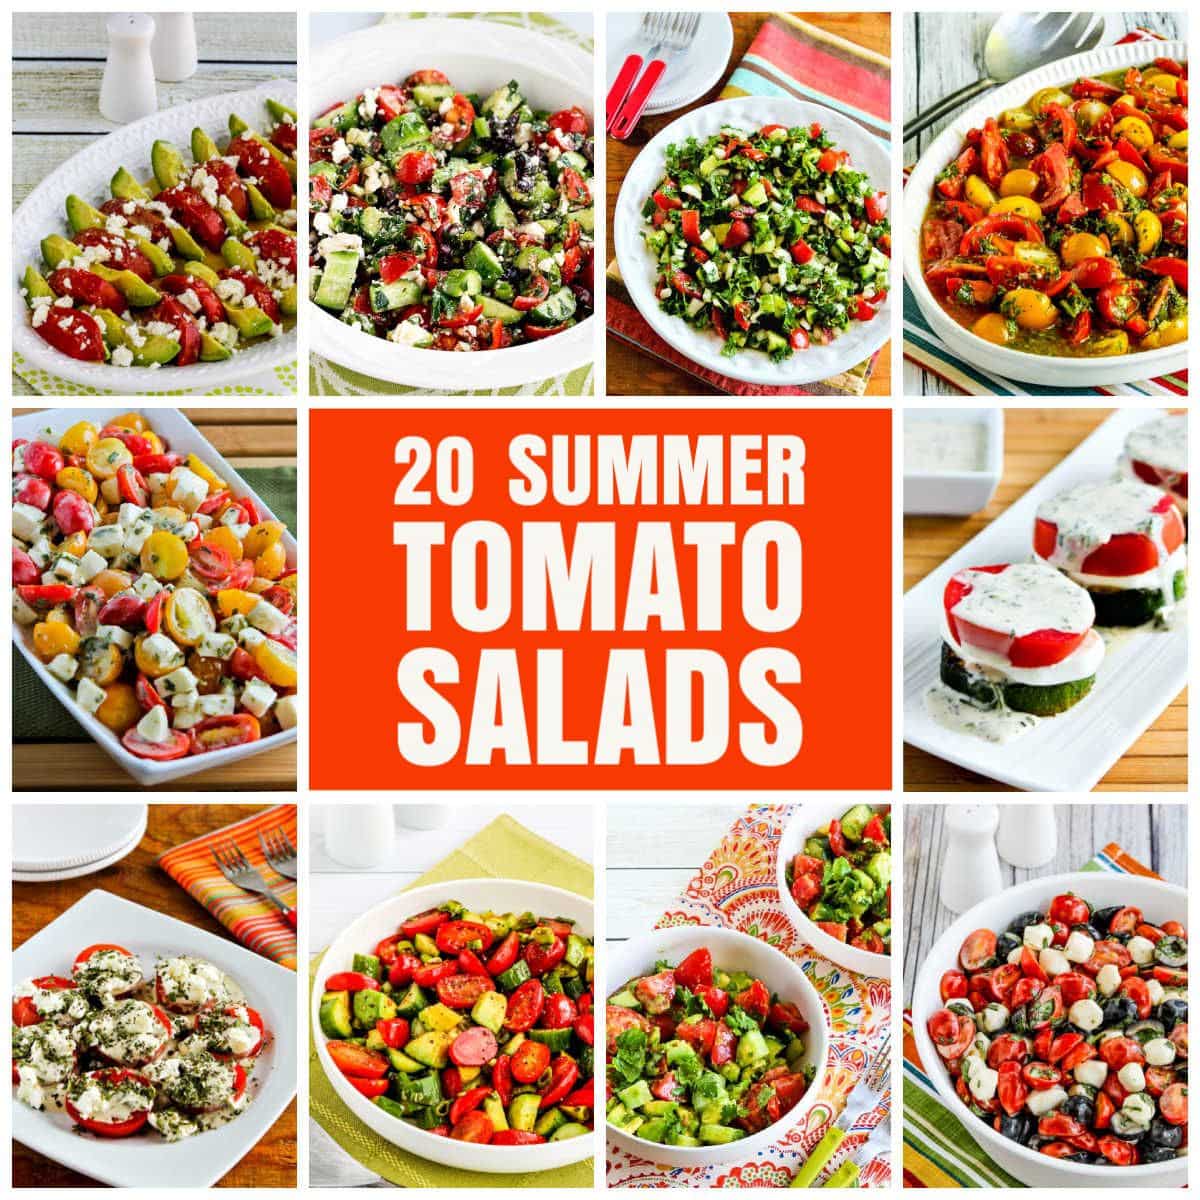 Text overlay collage for 20 Summer Tomato Salads with photos of featured recipes.